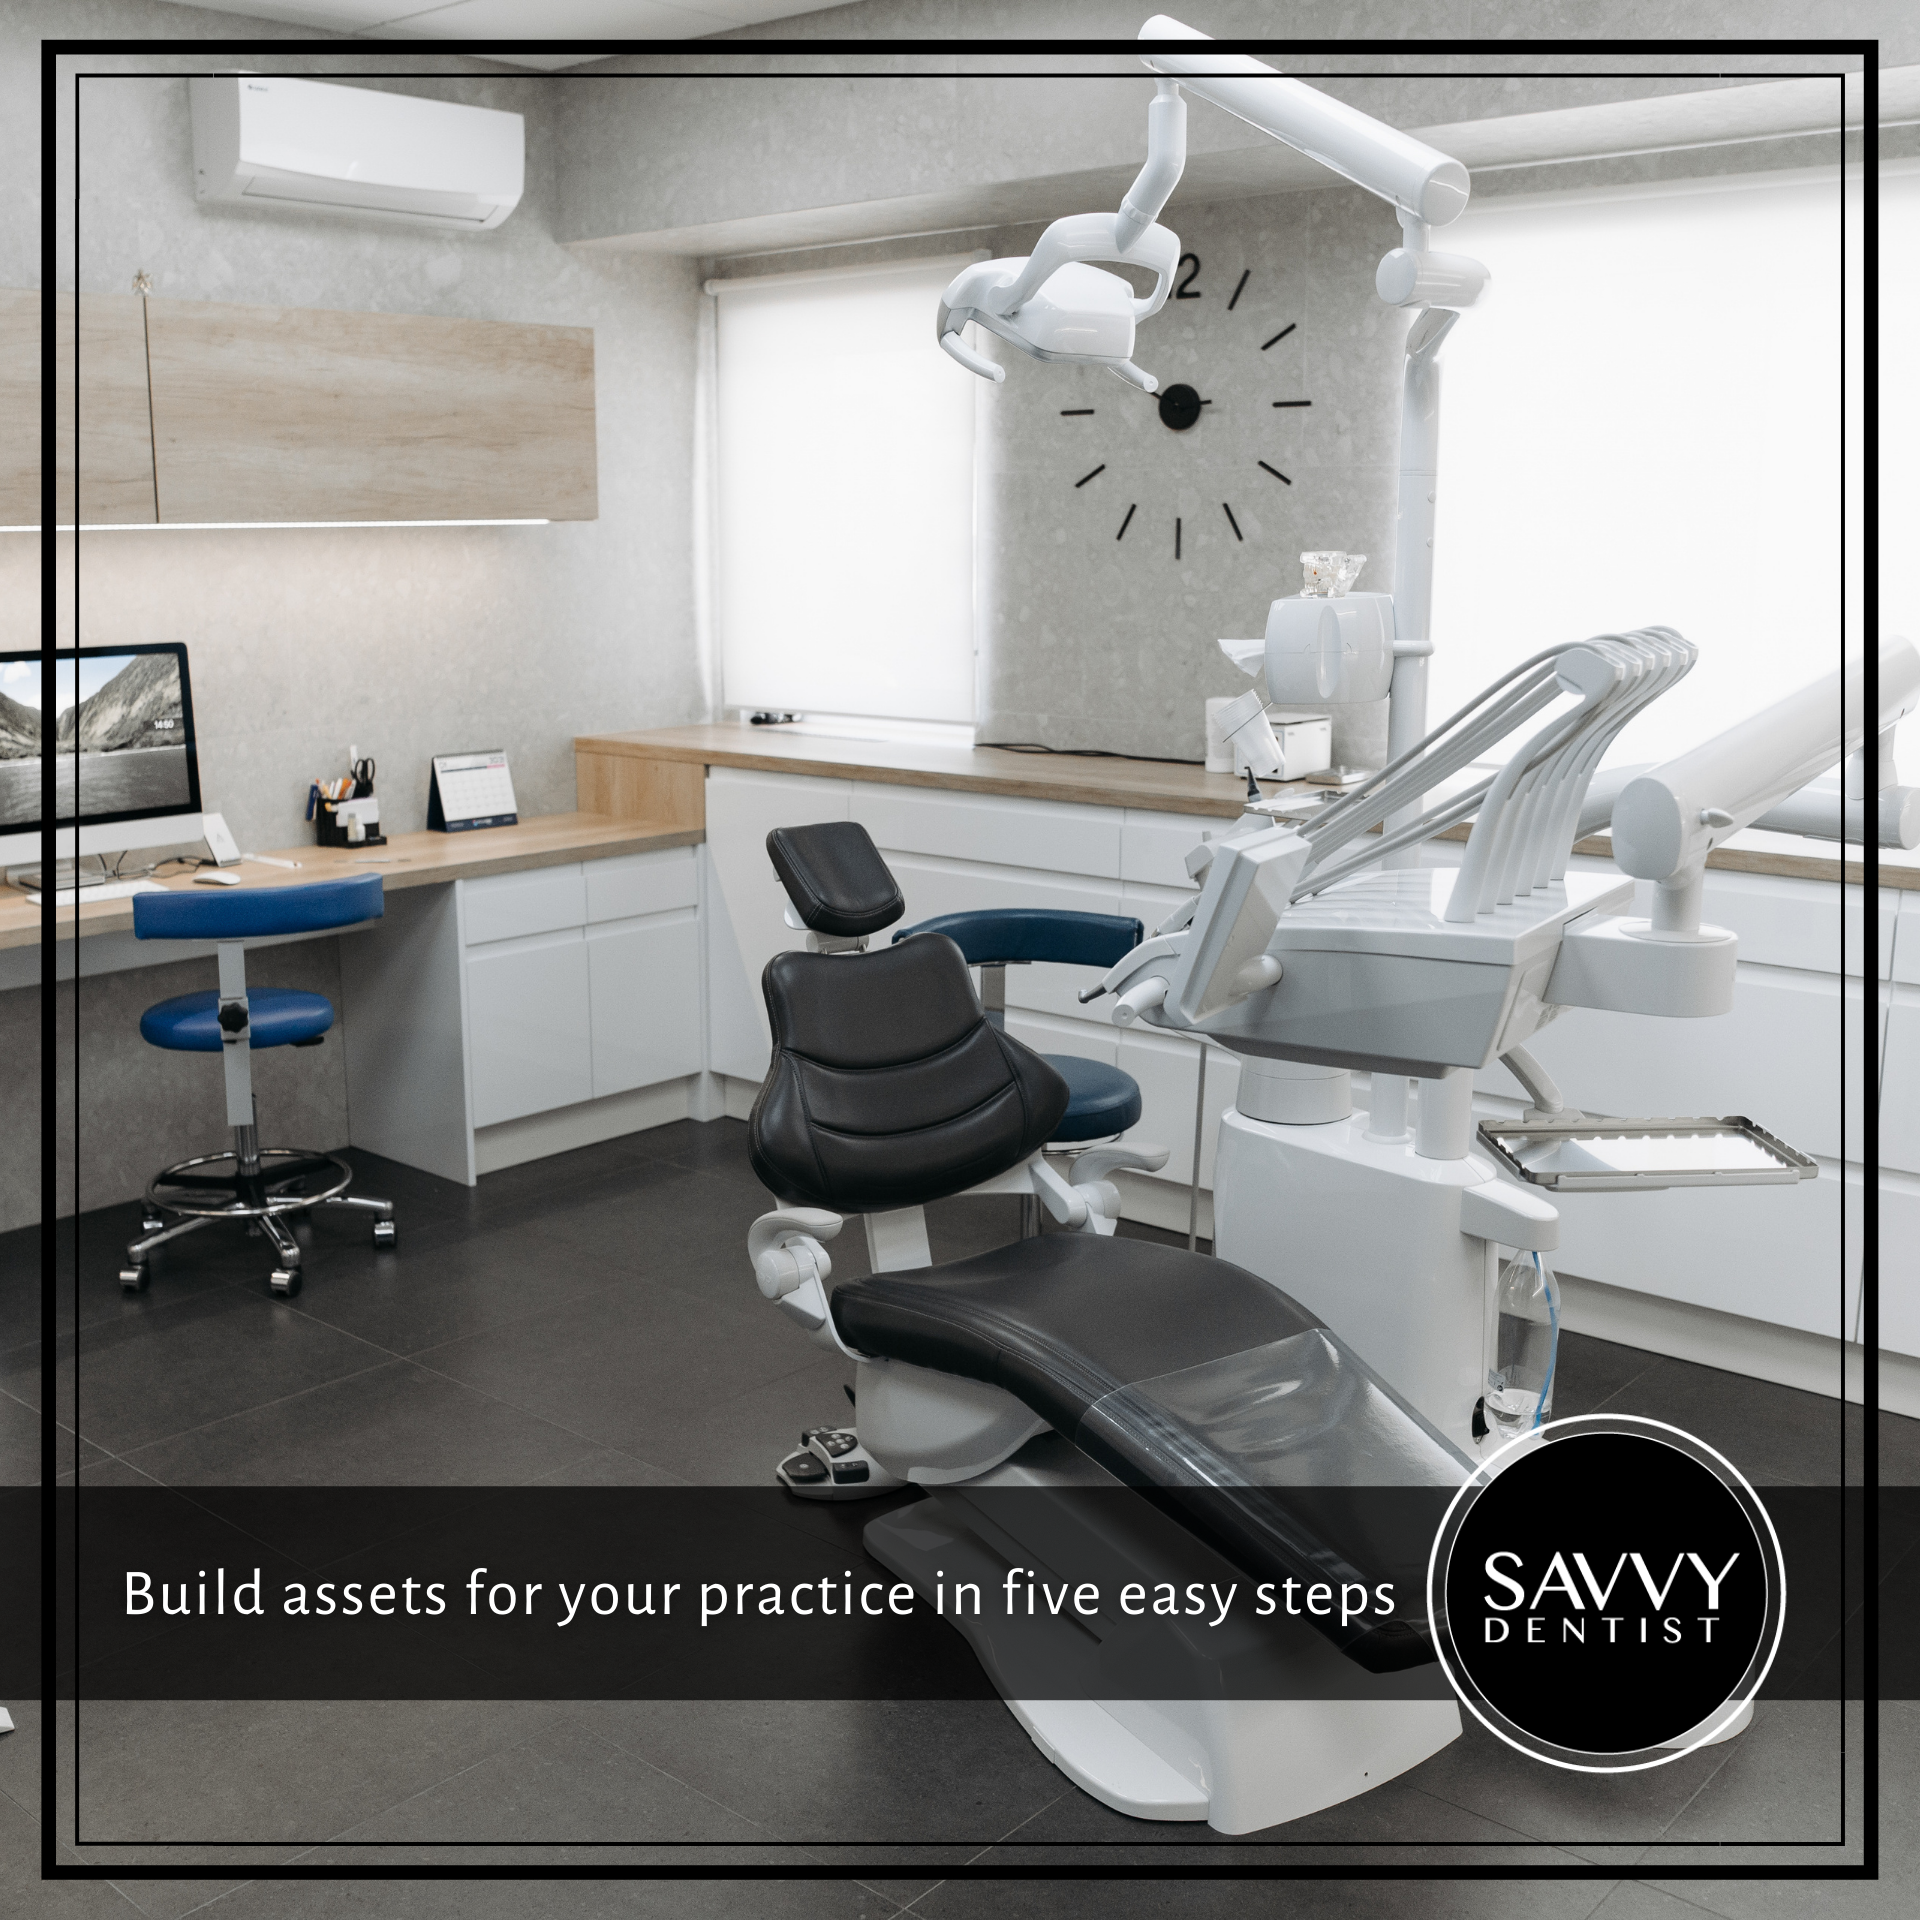 Build assets for your practice in five easy steps